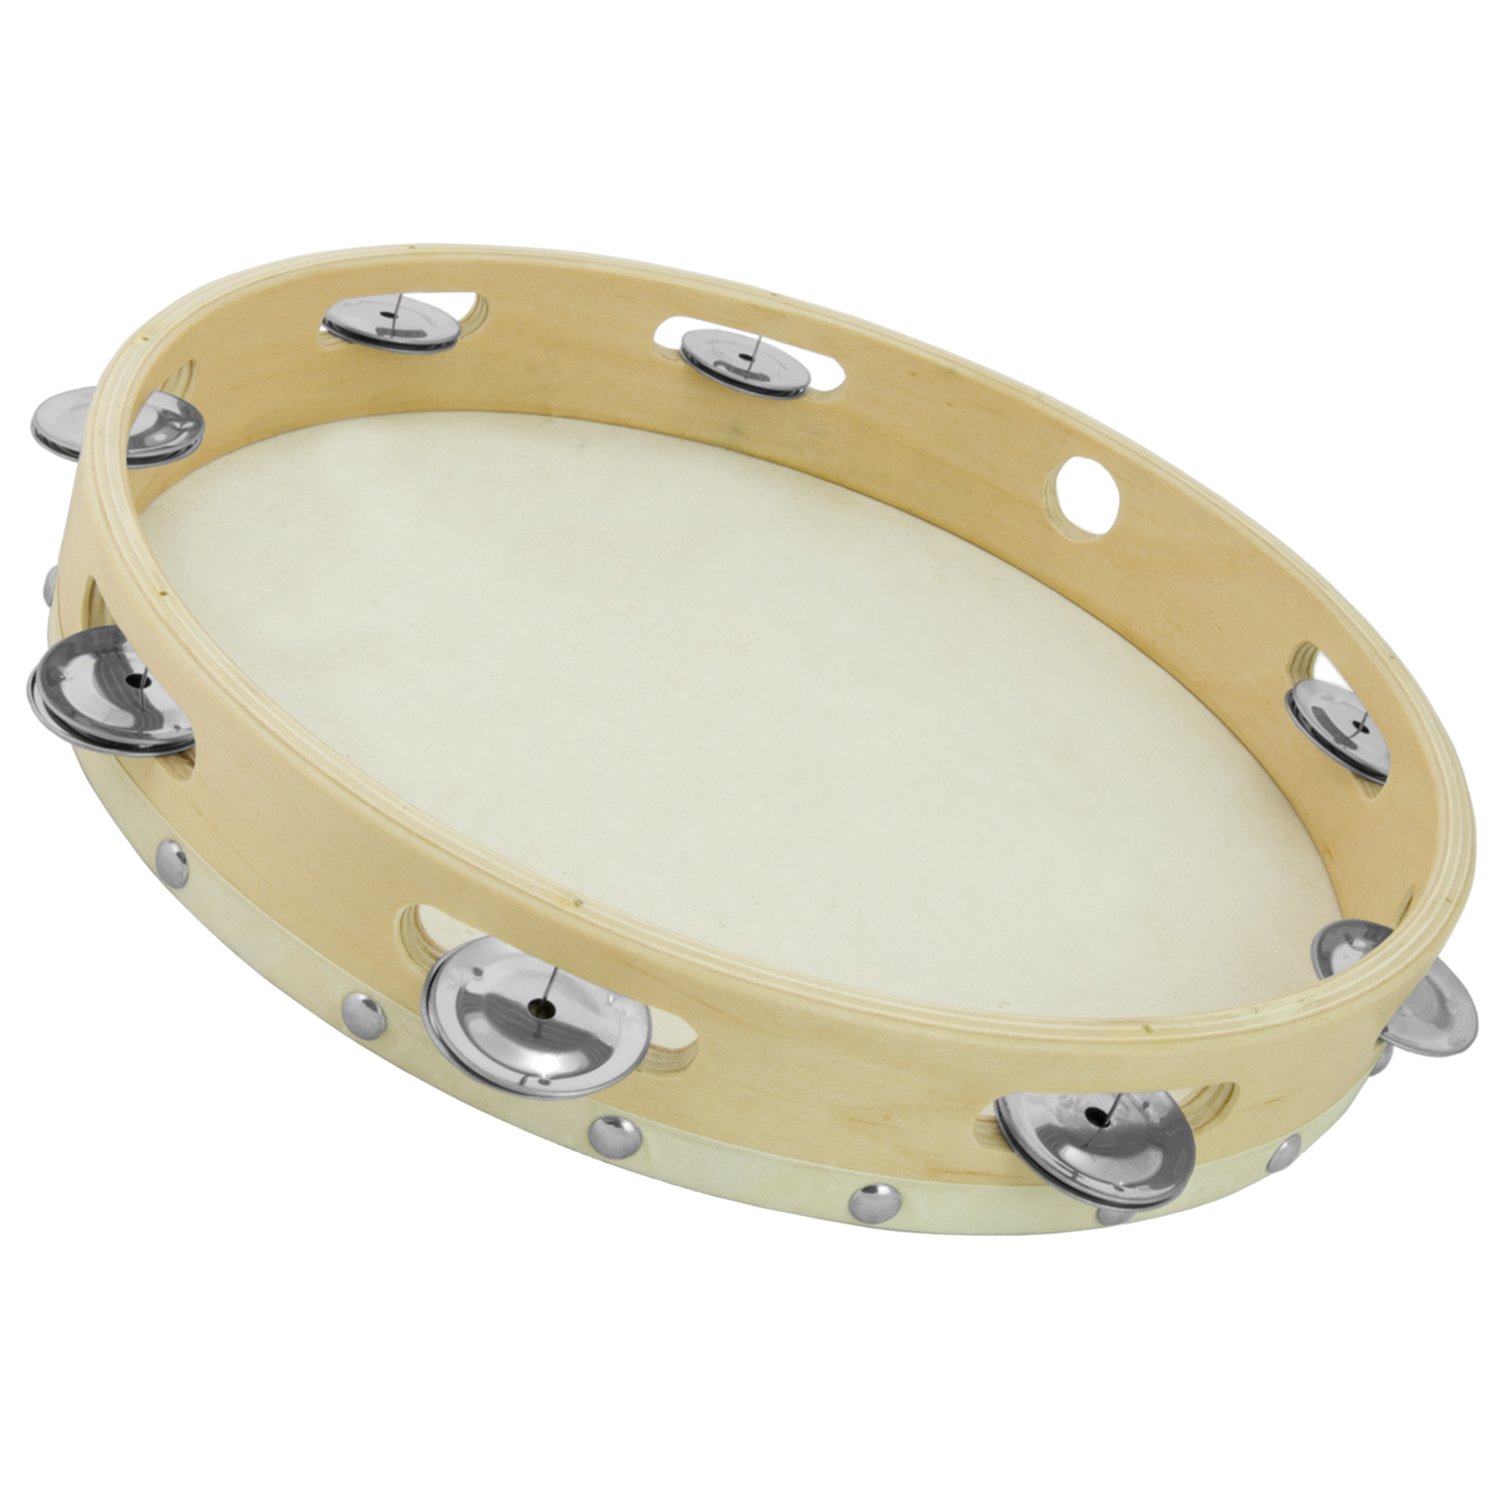 Tiger Tam91-12 Wooden Tambourine With Natural Drumhead - 12 Inches ...